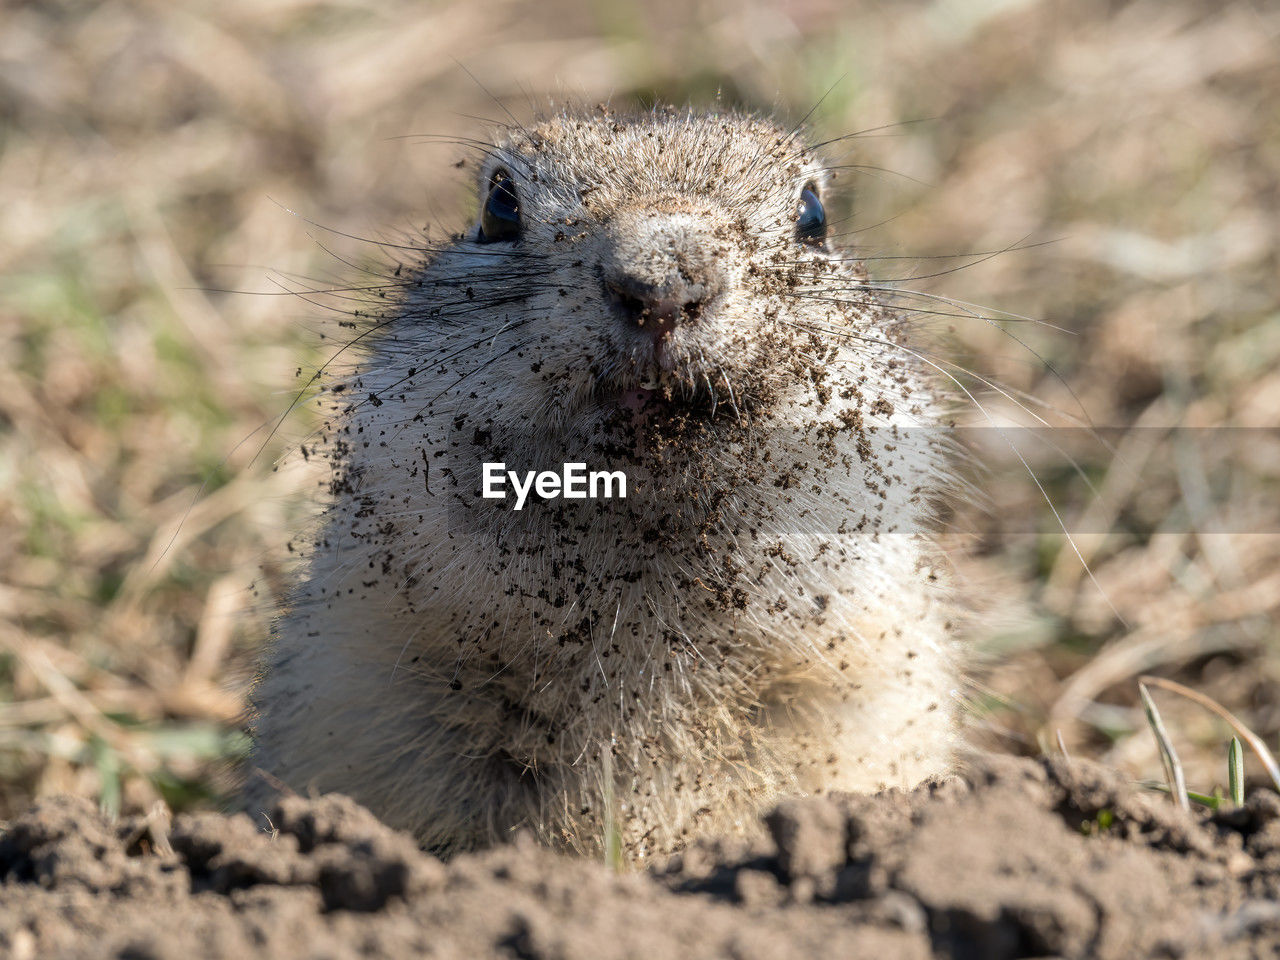 animal themes, animal, animal wildlife, one animal, wildlife, nature, mammal, prairie dog, portrait, squirrel, no people, looking at camera, rodent, outdoors, close-up, animal body part, day, front view, land